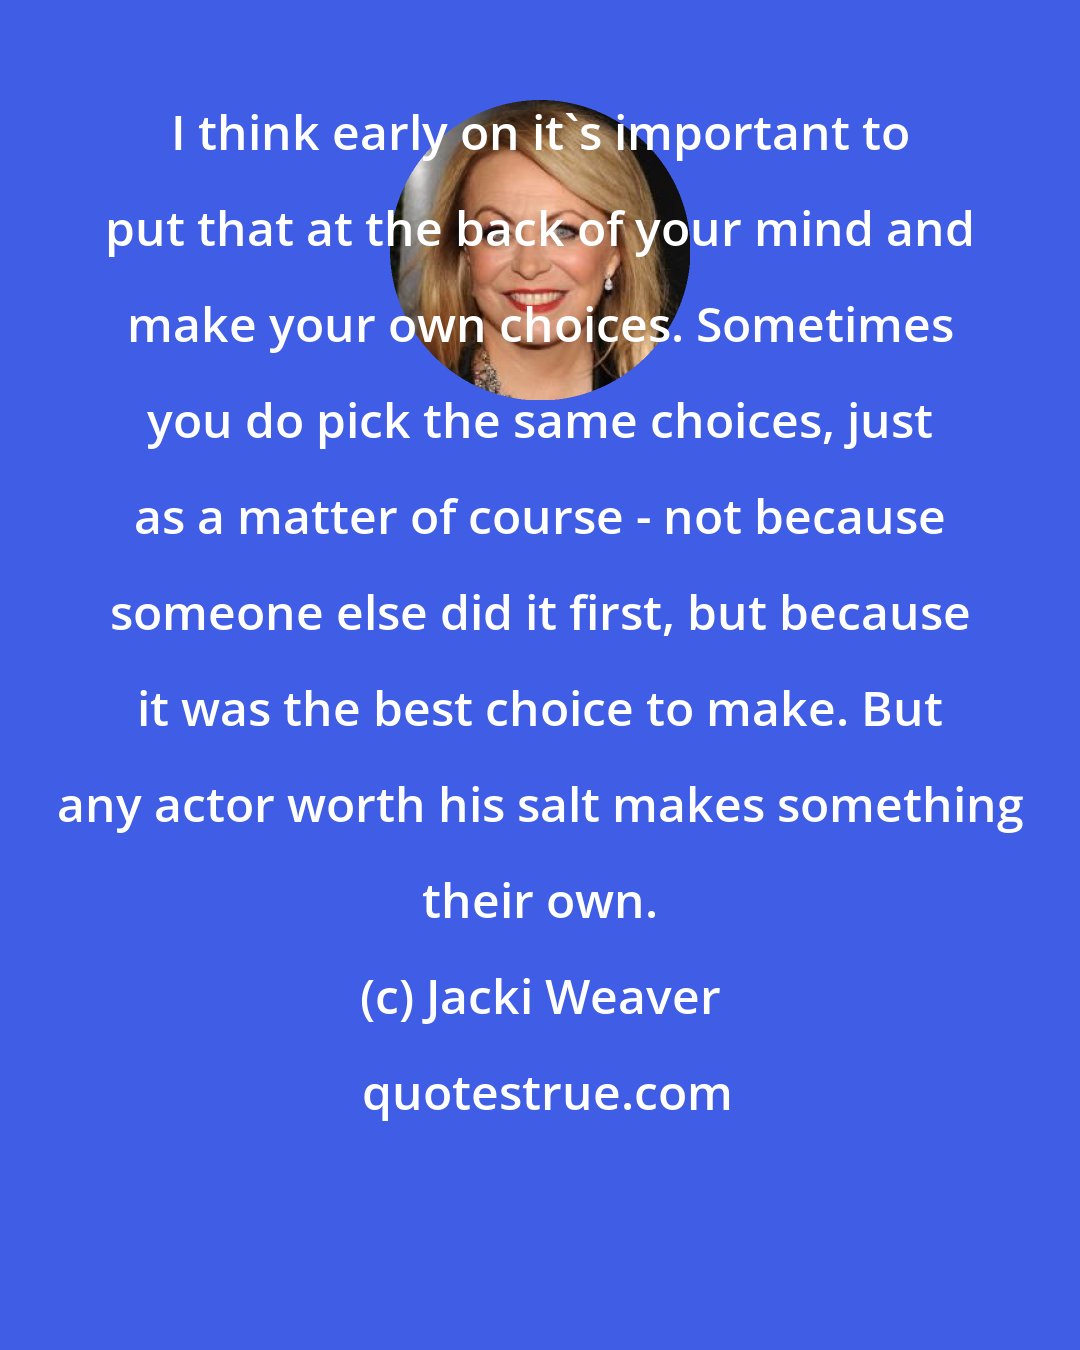 Jacki Weaver: I think early on it's important to put that at the back of your mind and make your own choices. Sometimes you do pick the same choices, just as a matter of course - not because someone else did it first, but because it was the best choice to make. But any actor worth his salt makes something their own.